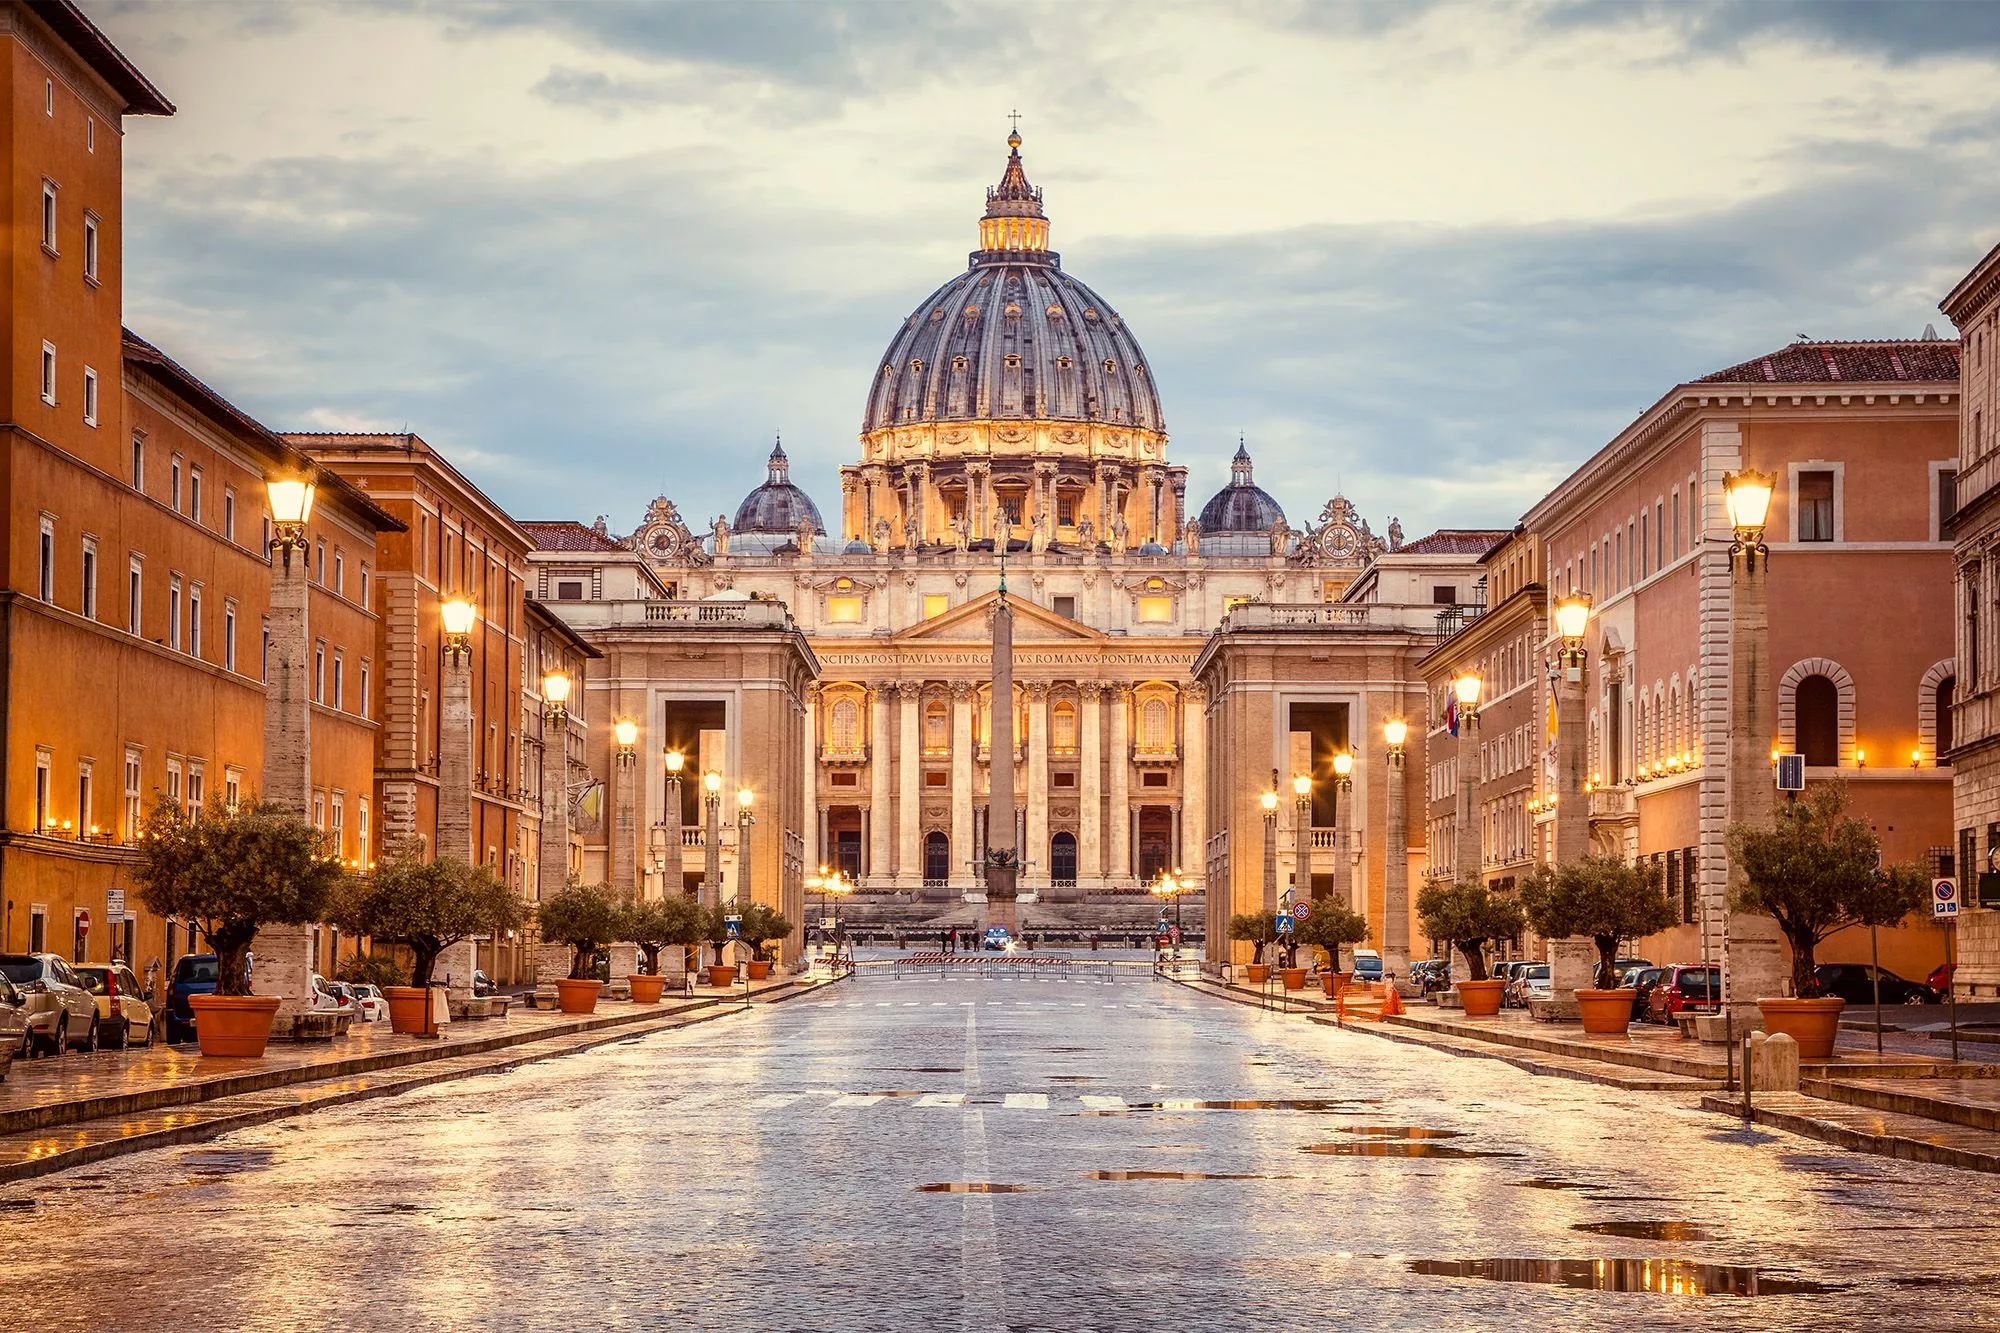 St. Peter’s Basilica in Vatican, Europe | Architecture - Rated 6.6